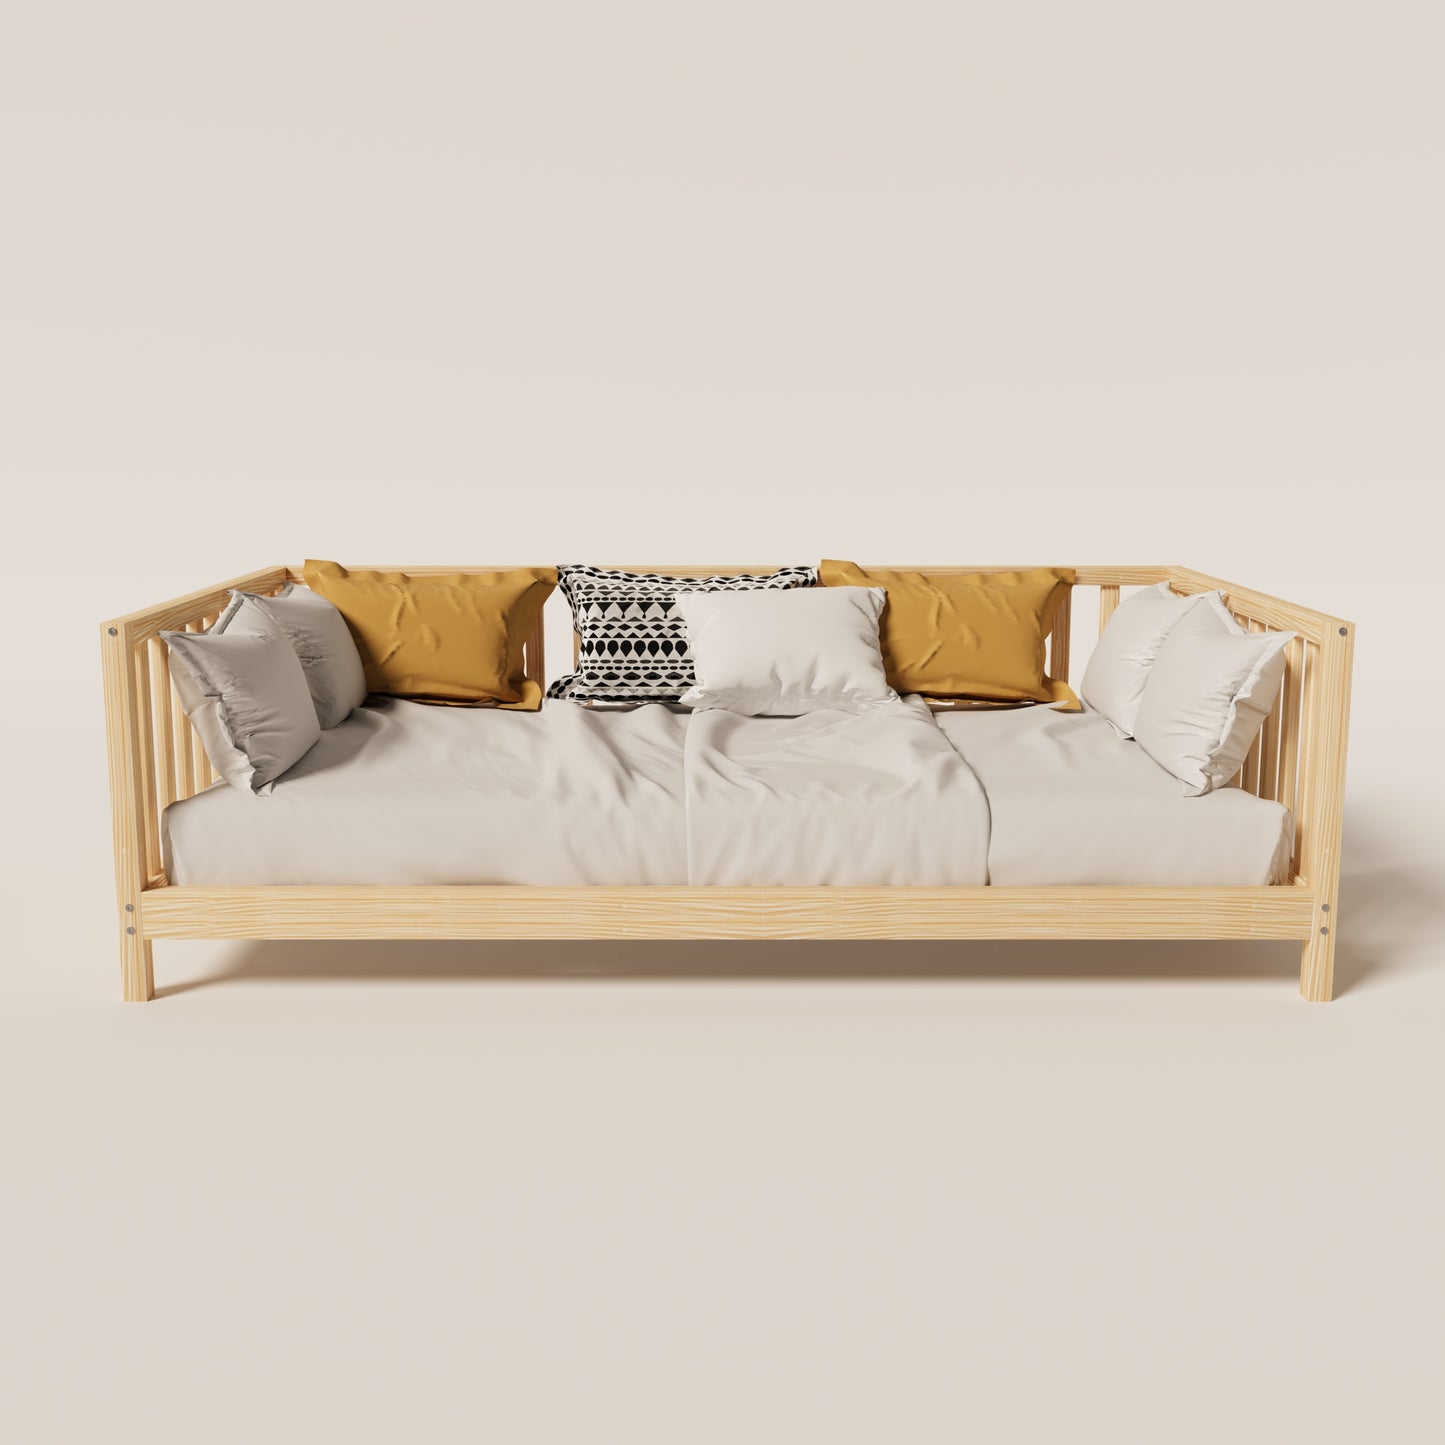 Open Access Montessori Bed with Legs